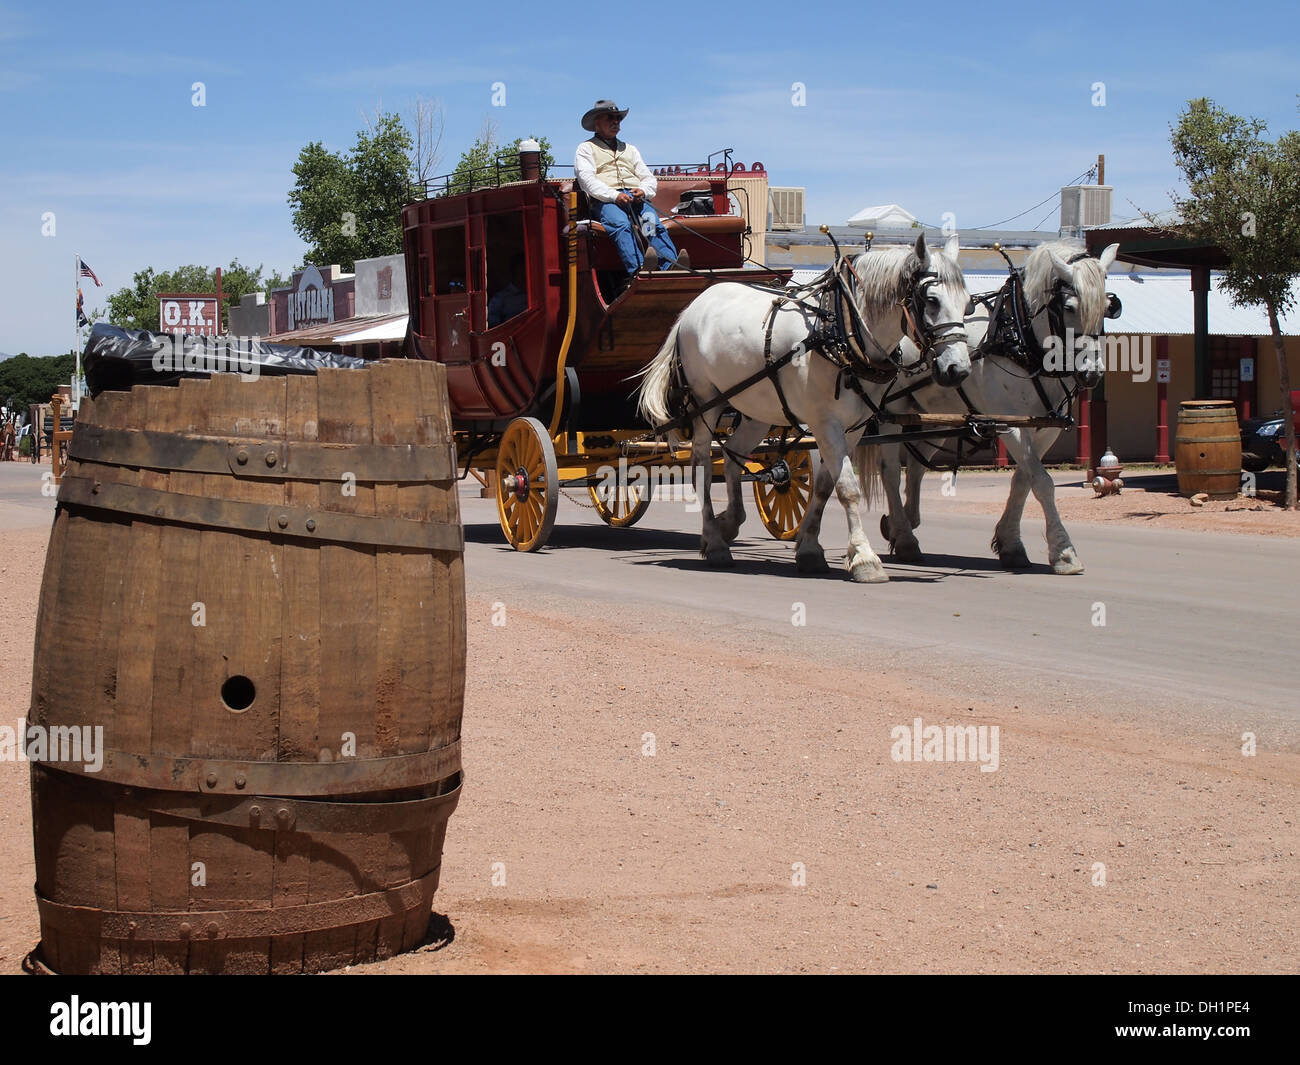 Actor portraying stagecoach driver drives through in the historical American Old West Town of Tombstone, Arizona, USA Stock Photo